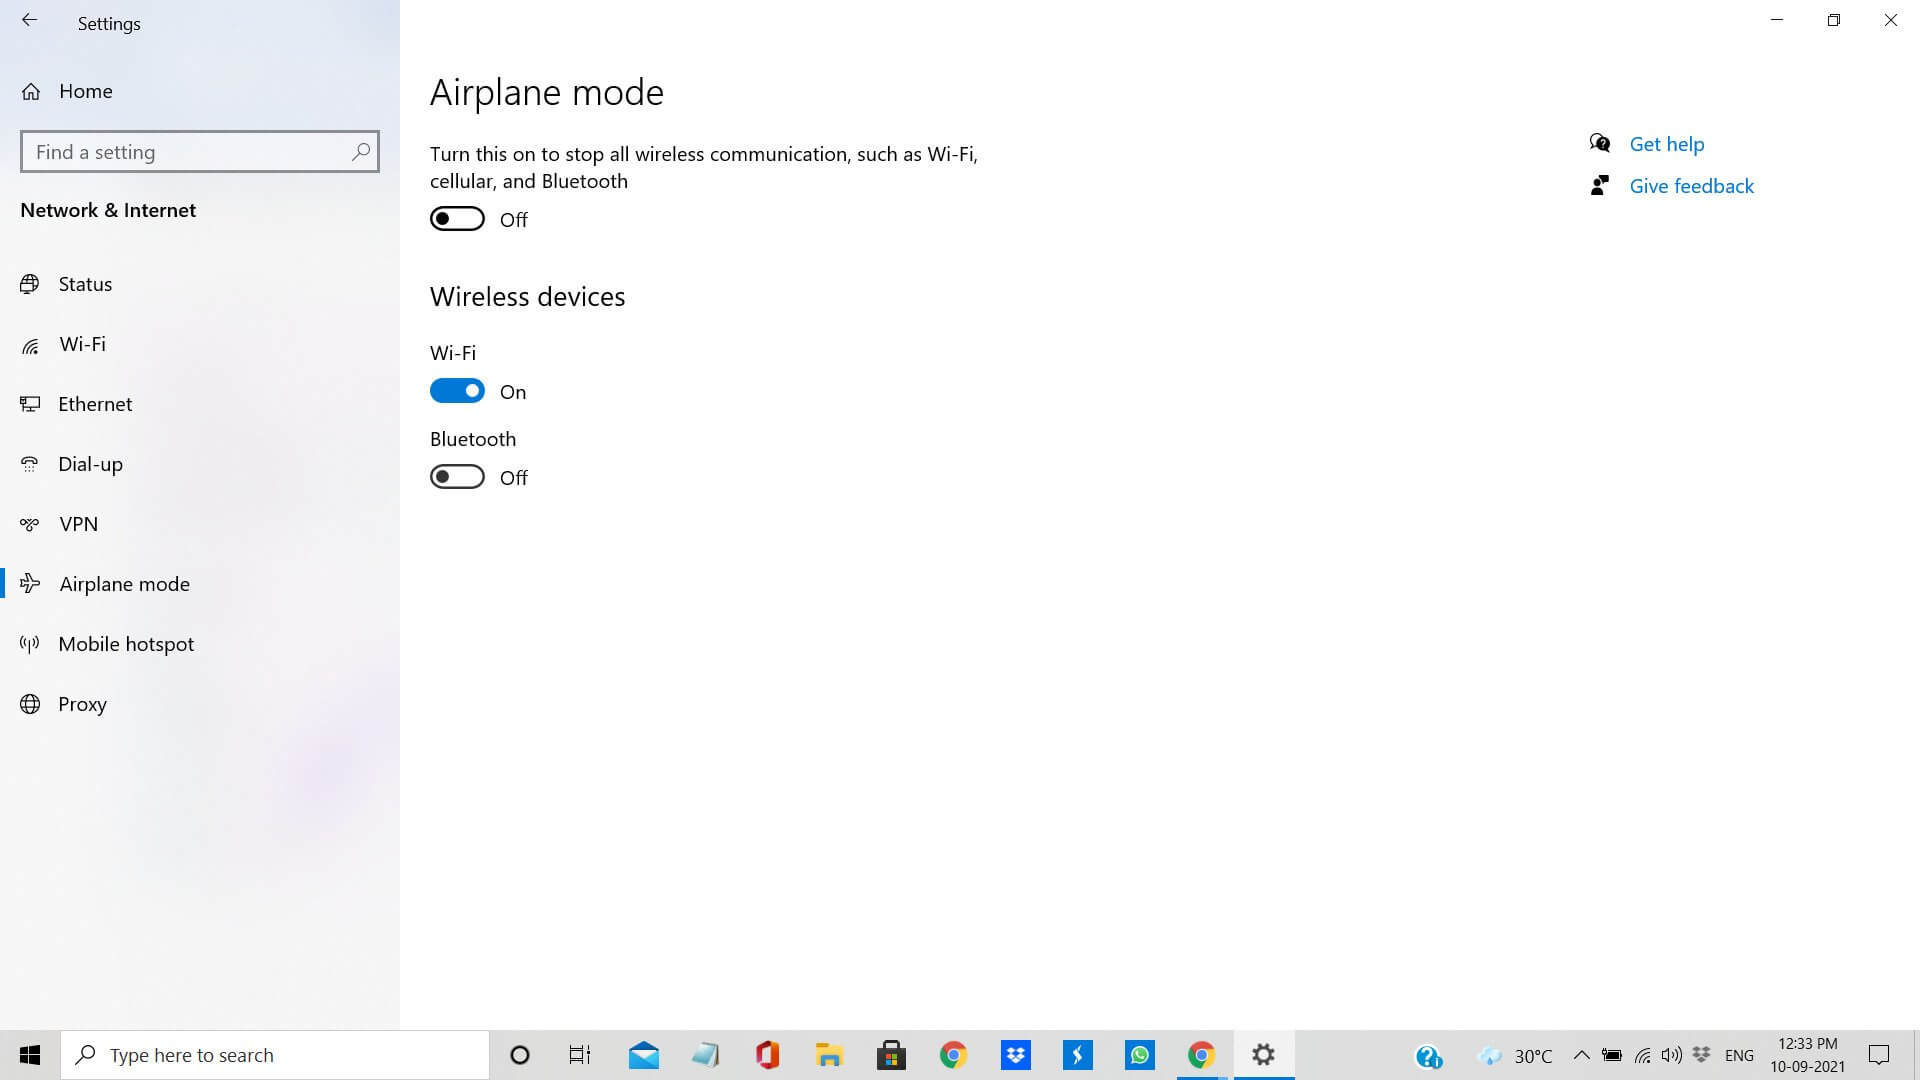 How To Fix Windows 10 Stuck In Airplane Mode In 2021?